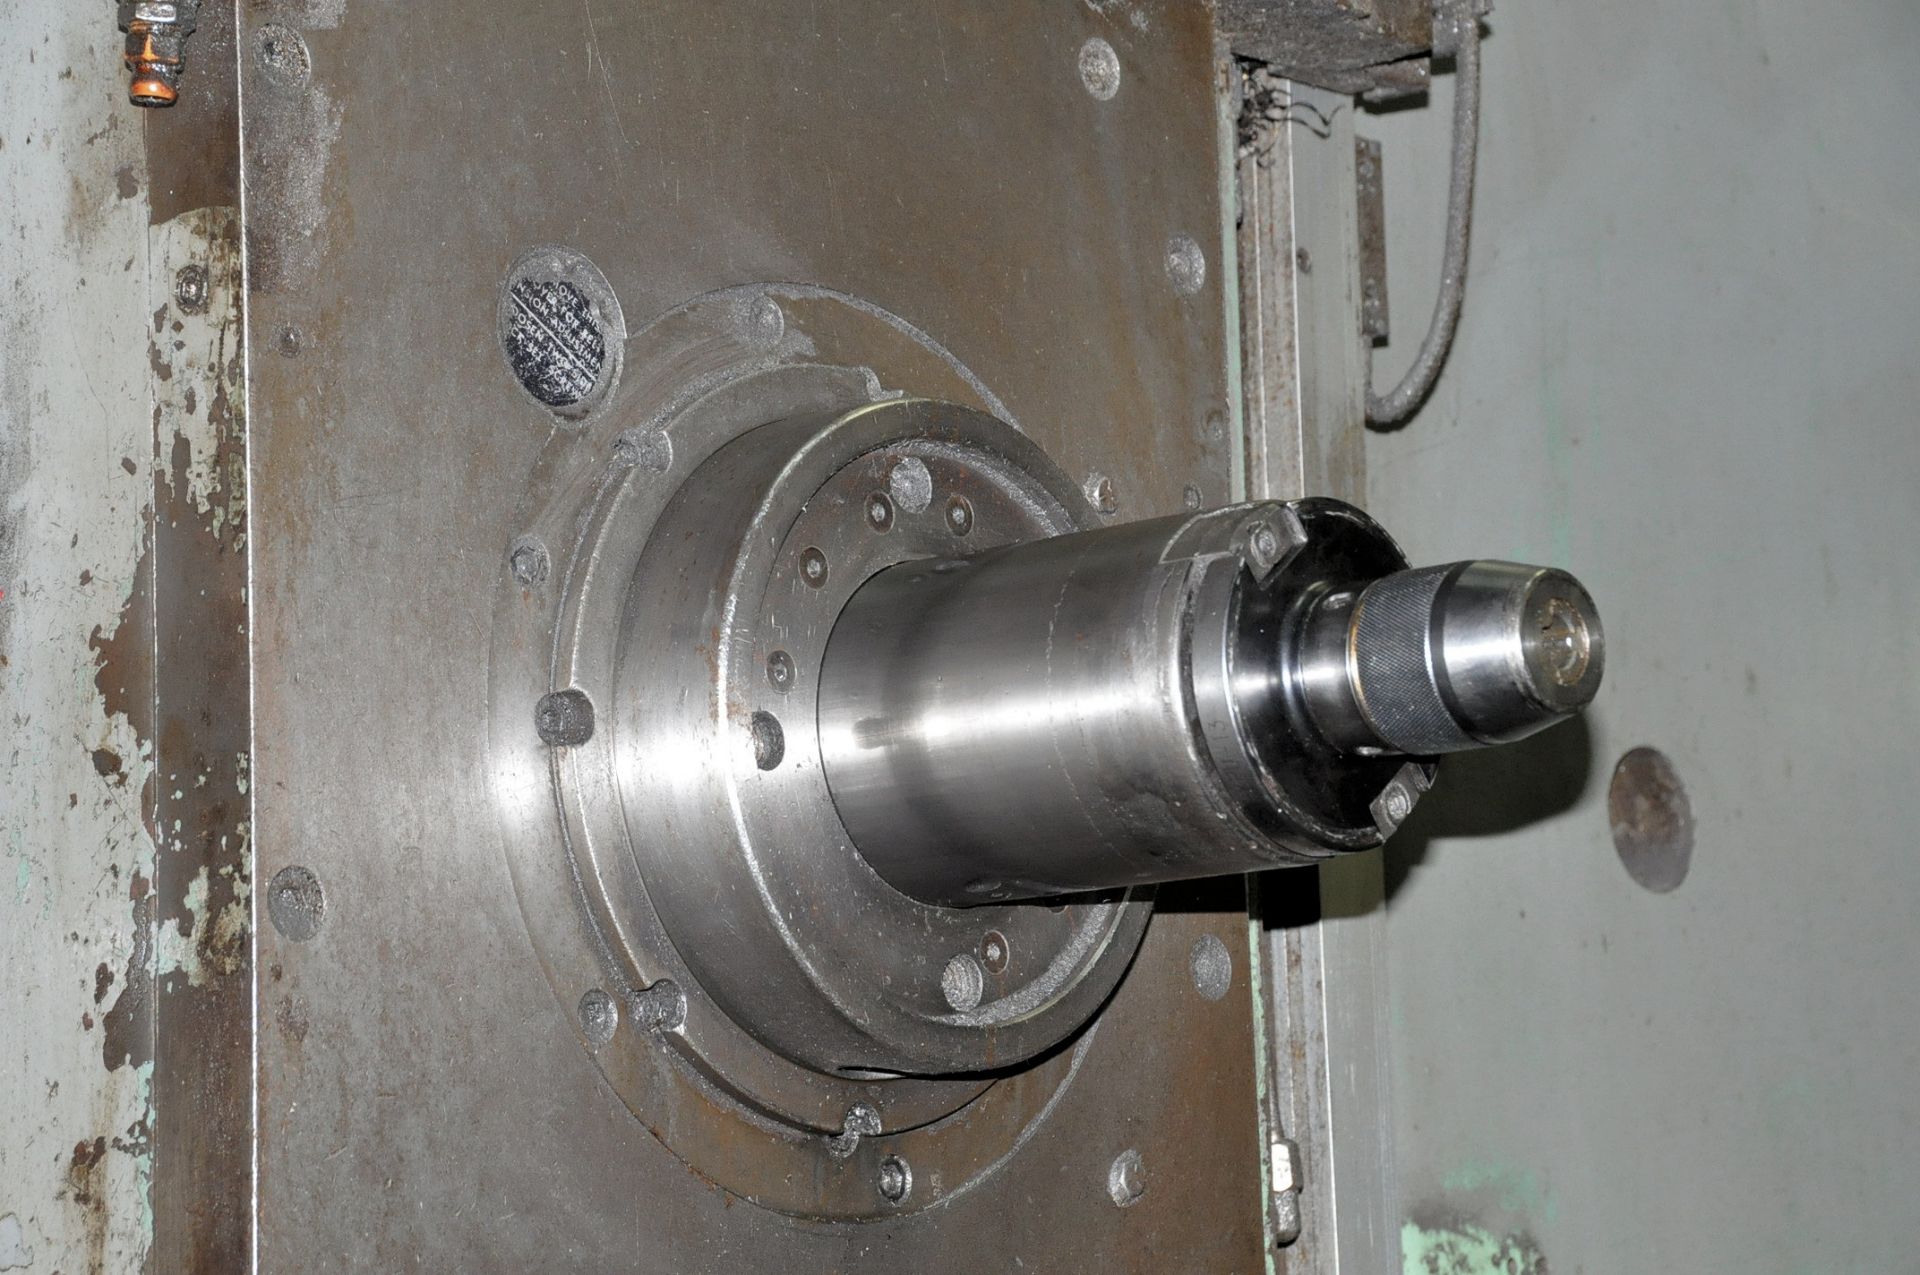 Lucas Model 441B-72 Horizontal Boring and Milling Machine, 4 Inch Spindle, Anilam Wizard 550 D.R.O., - Image 4 of 5